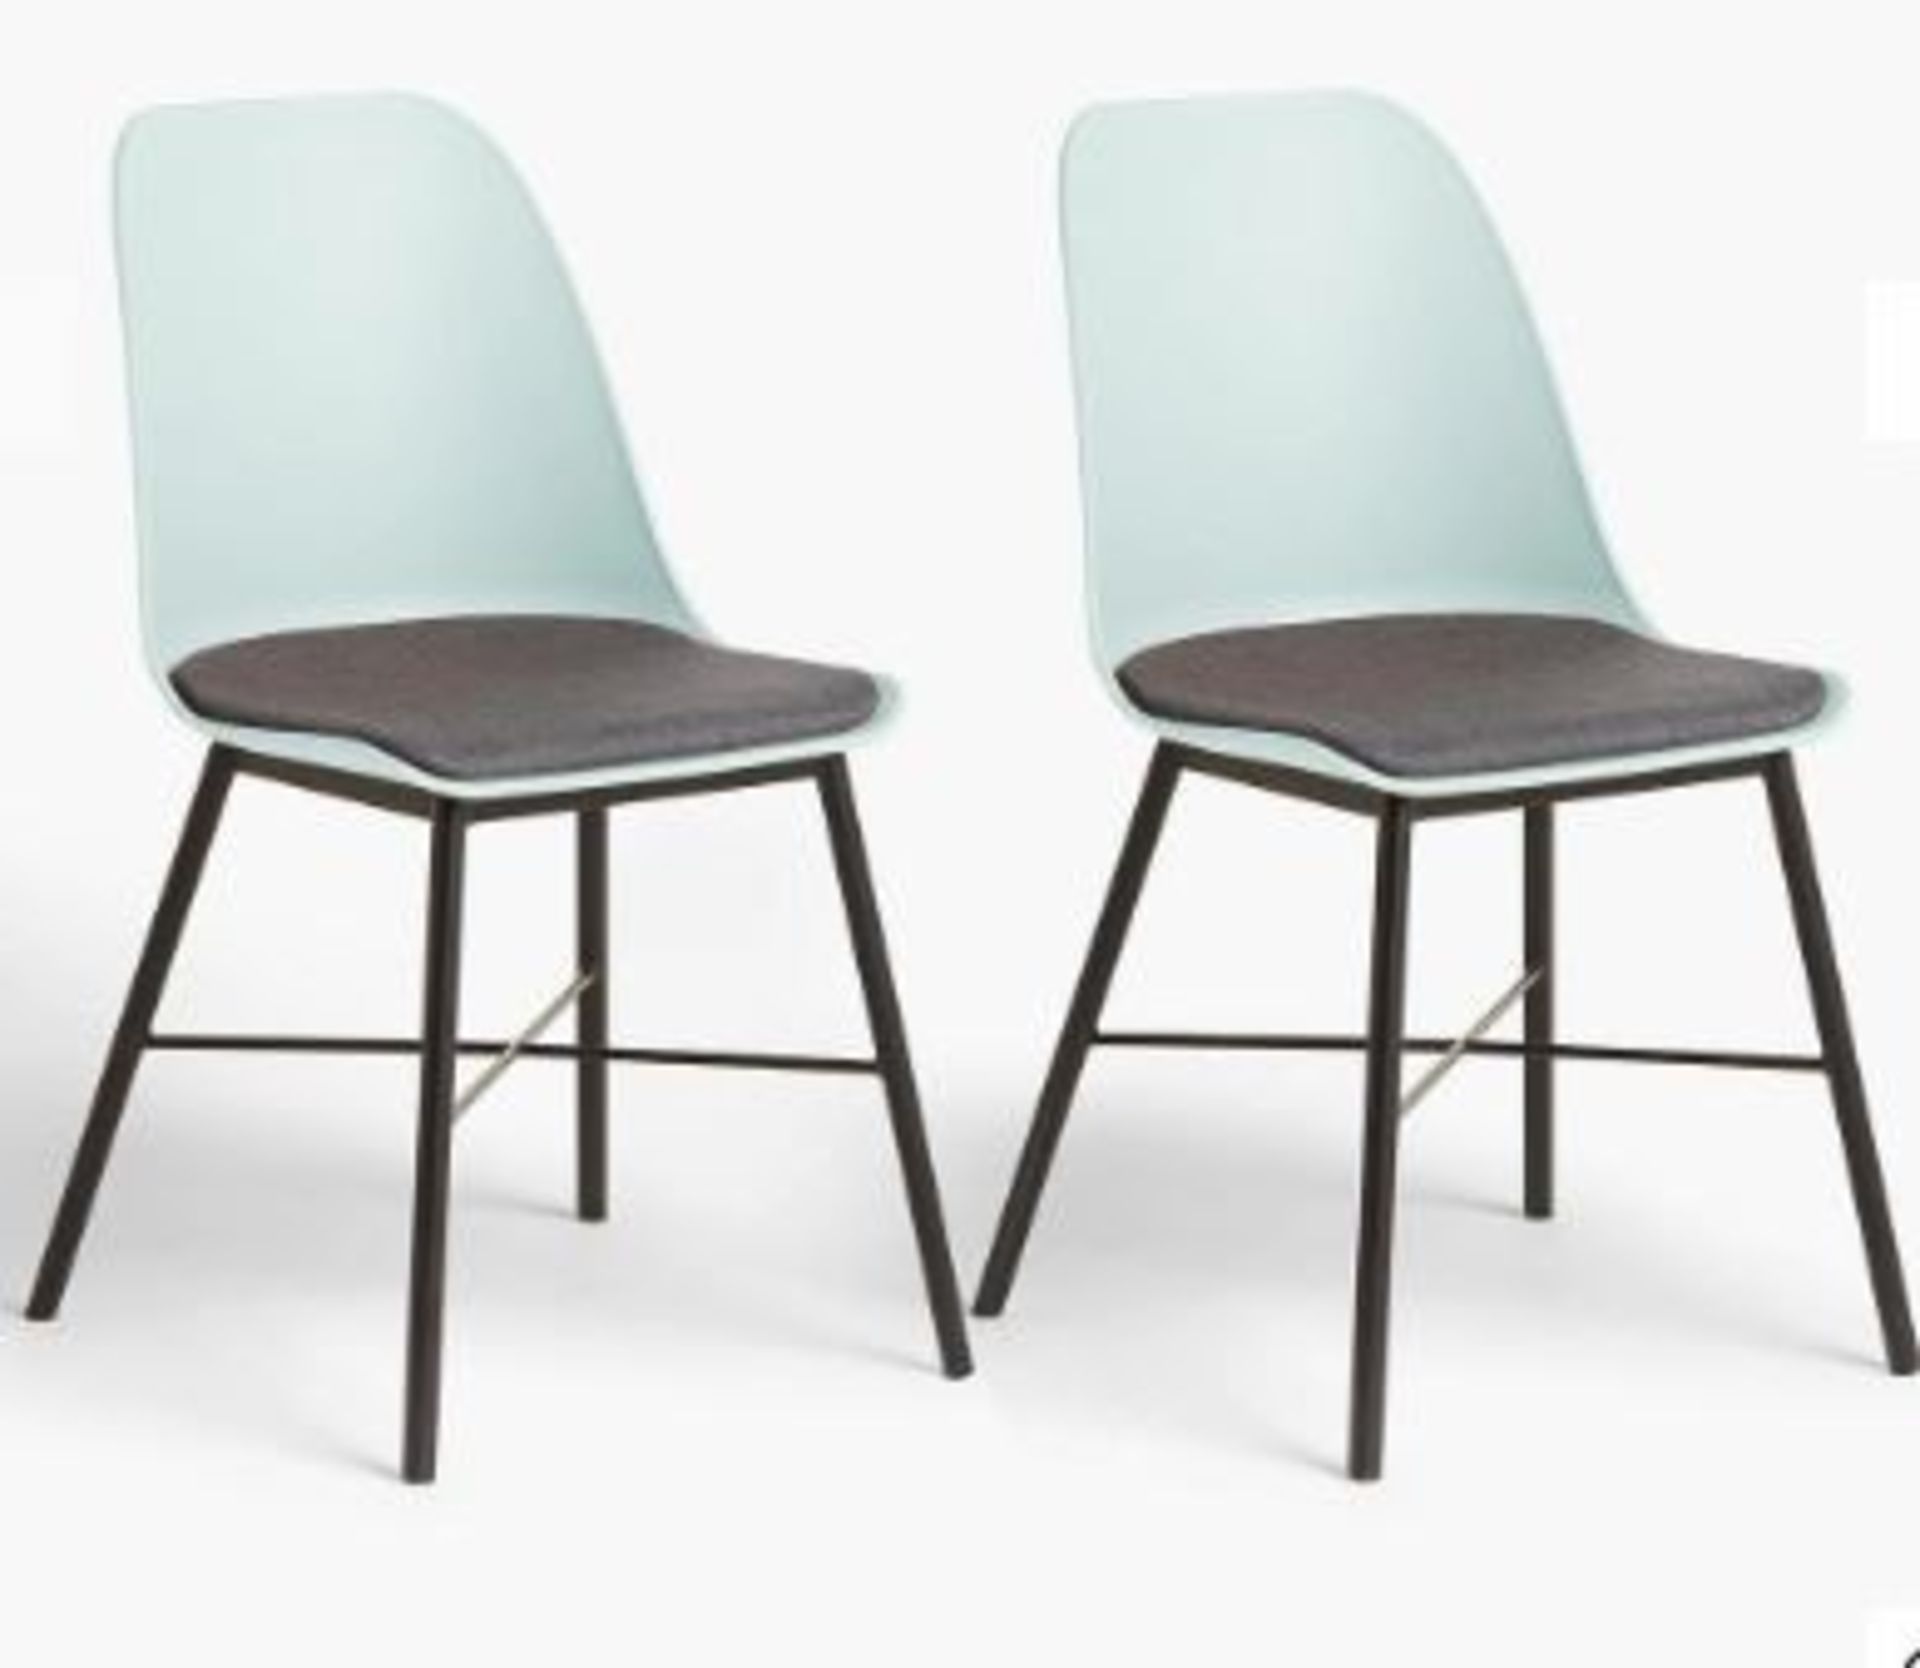 JOHN LEWIS WHISTLER CHAIR IN MINERAL BLUE